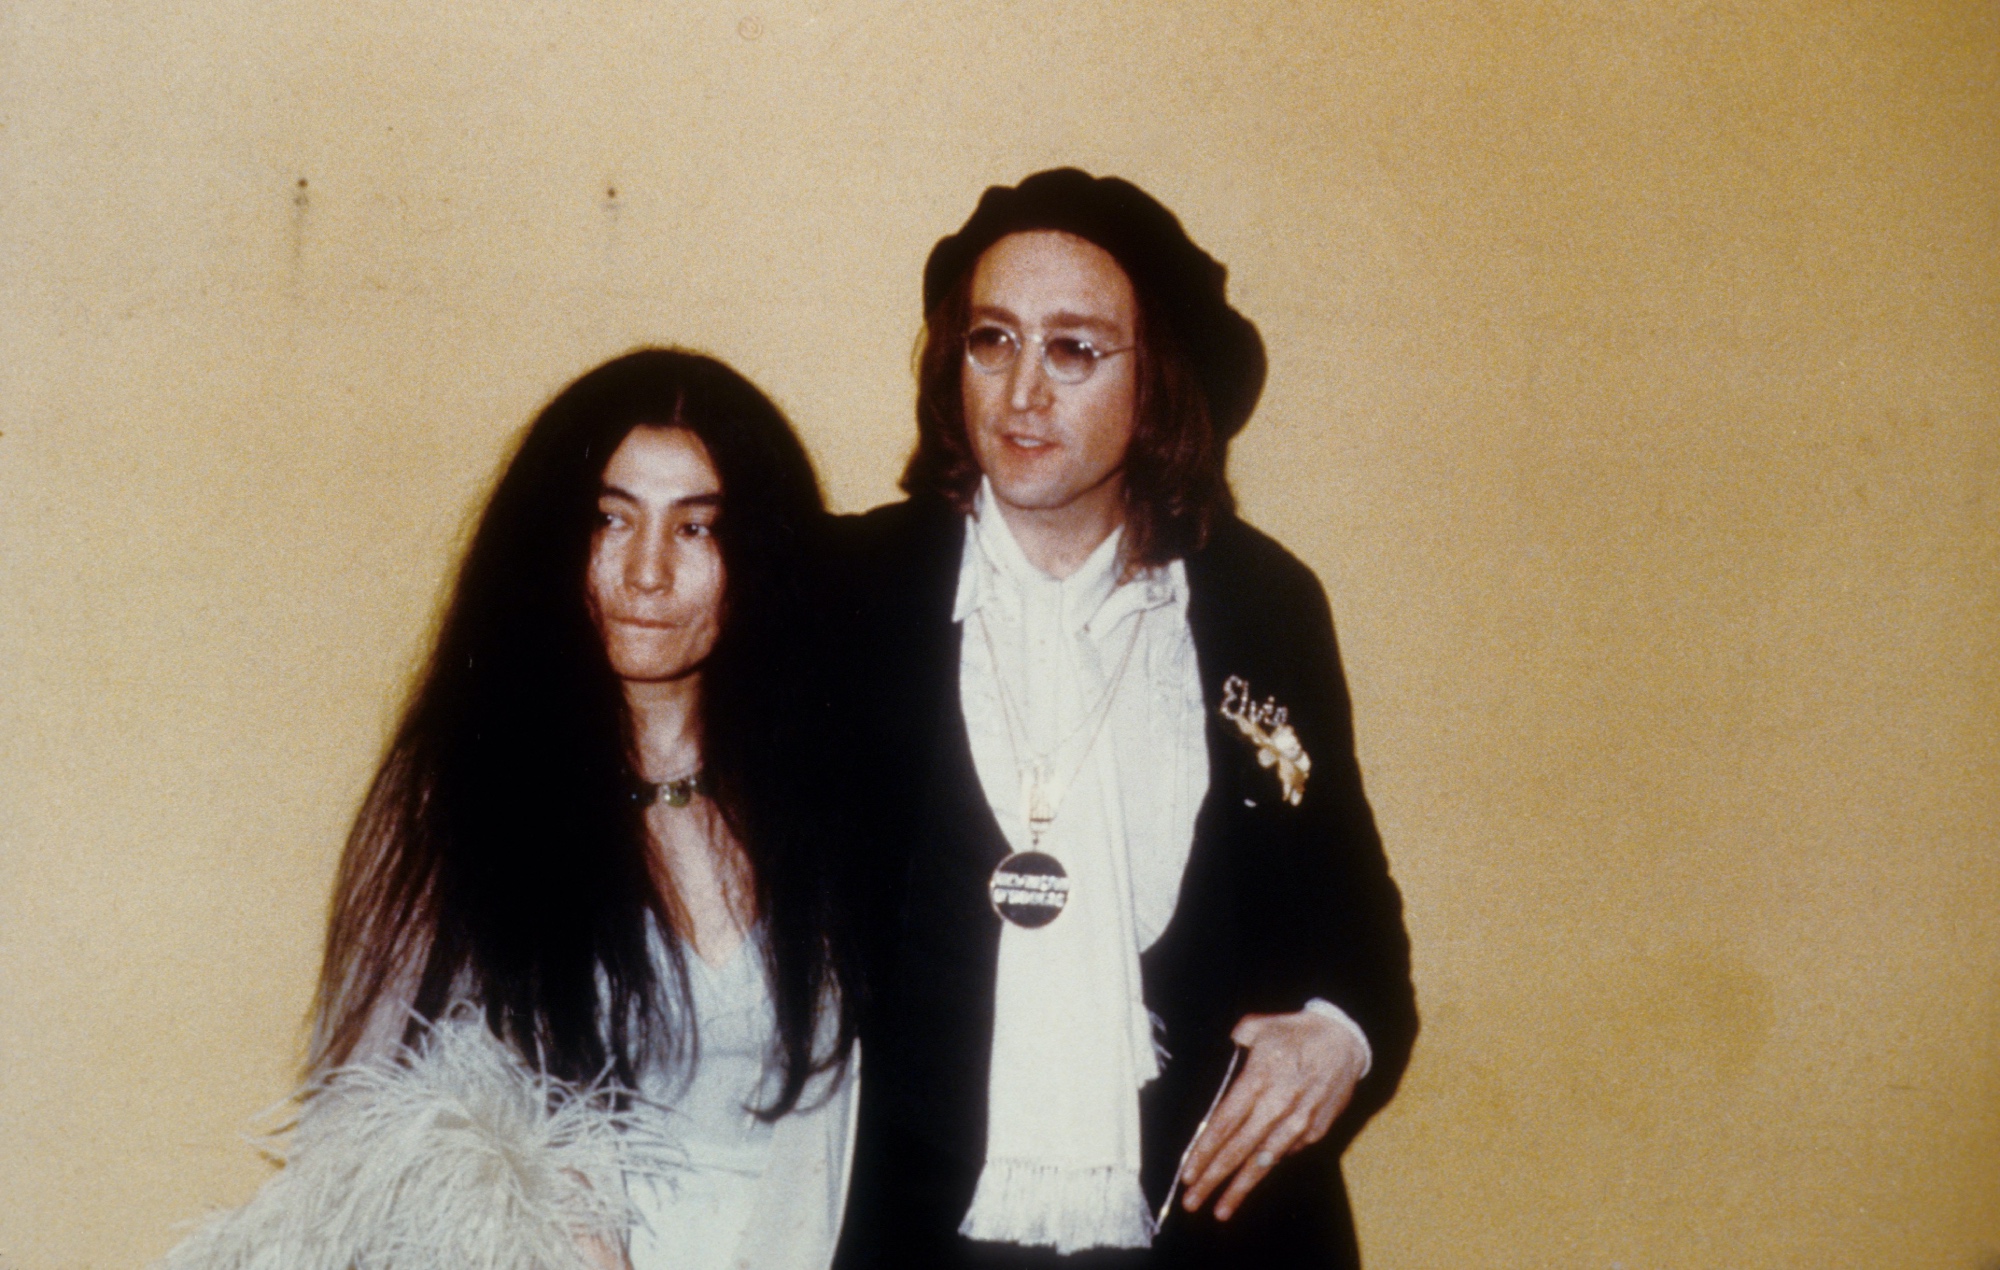 New book on The Beatles claims Yoko Ono instructed John Lennon how to take heroin